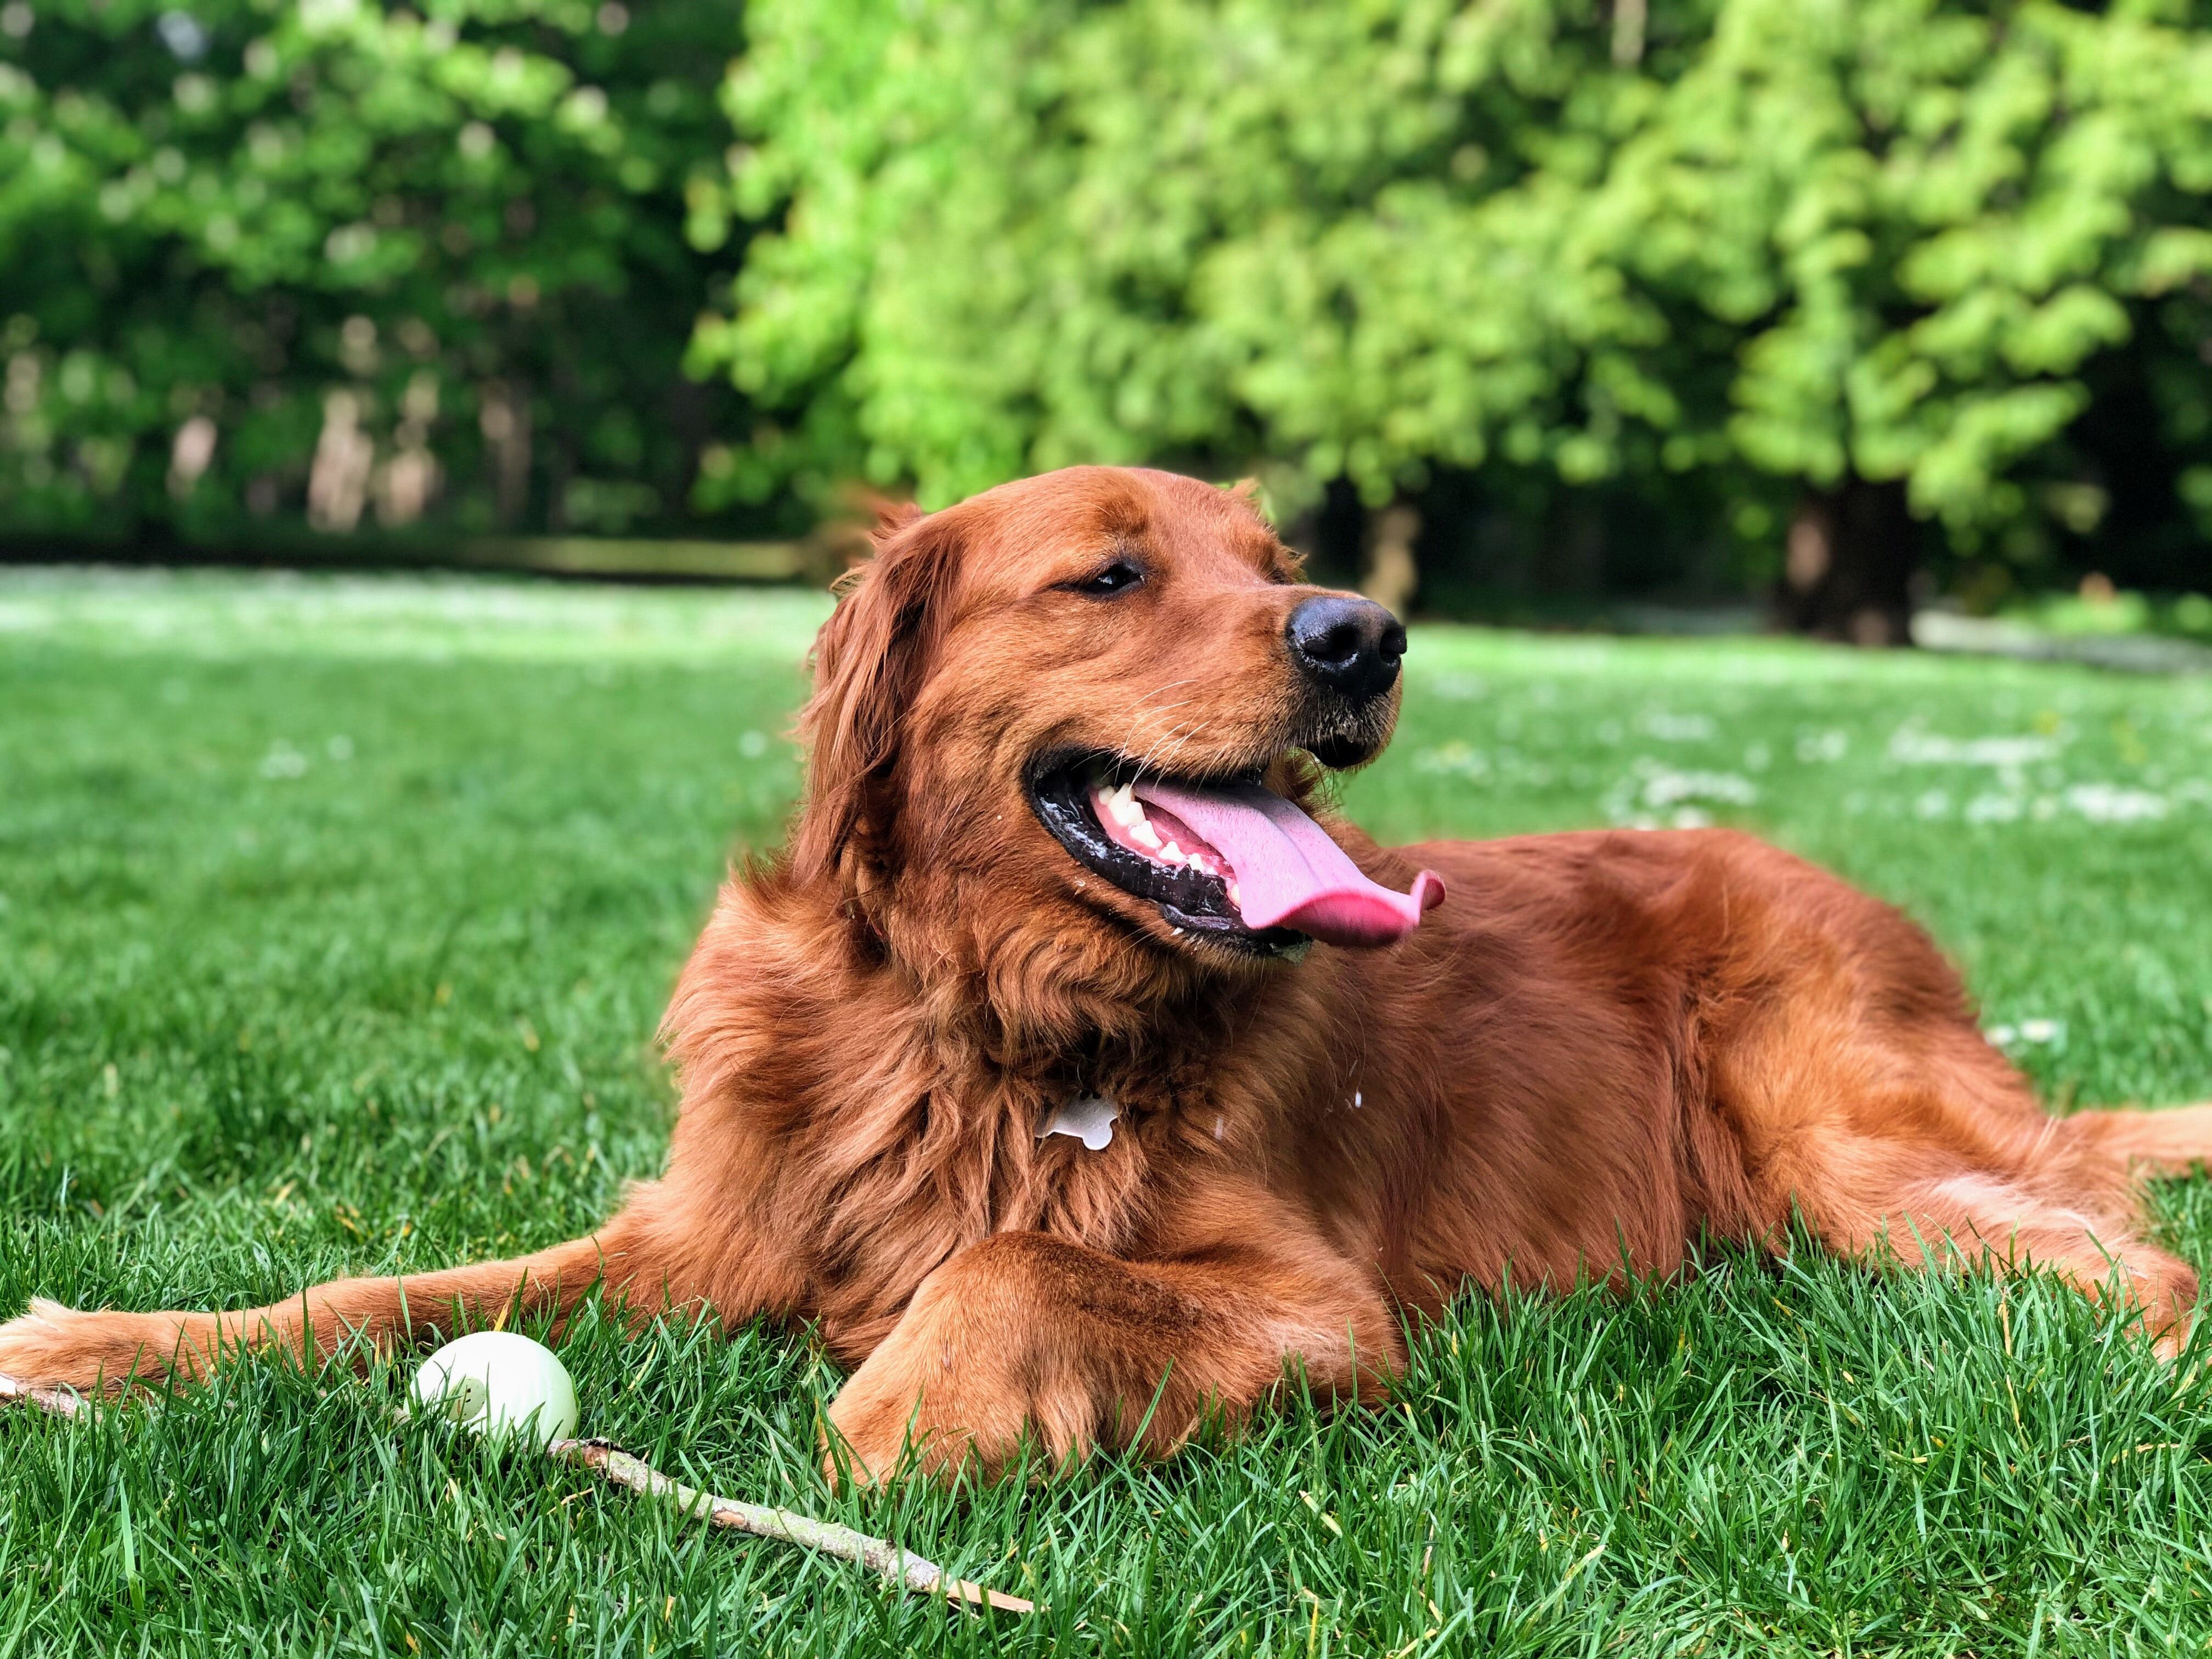 Golden Retriever lying on green grass field during day time